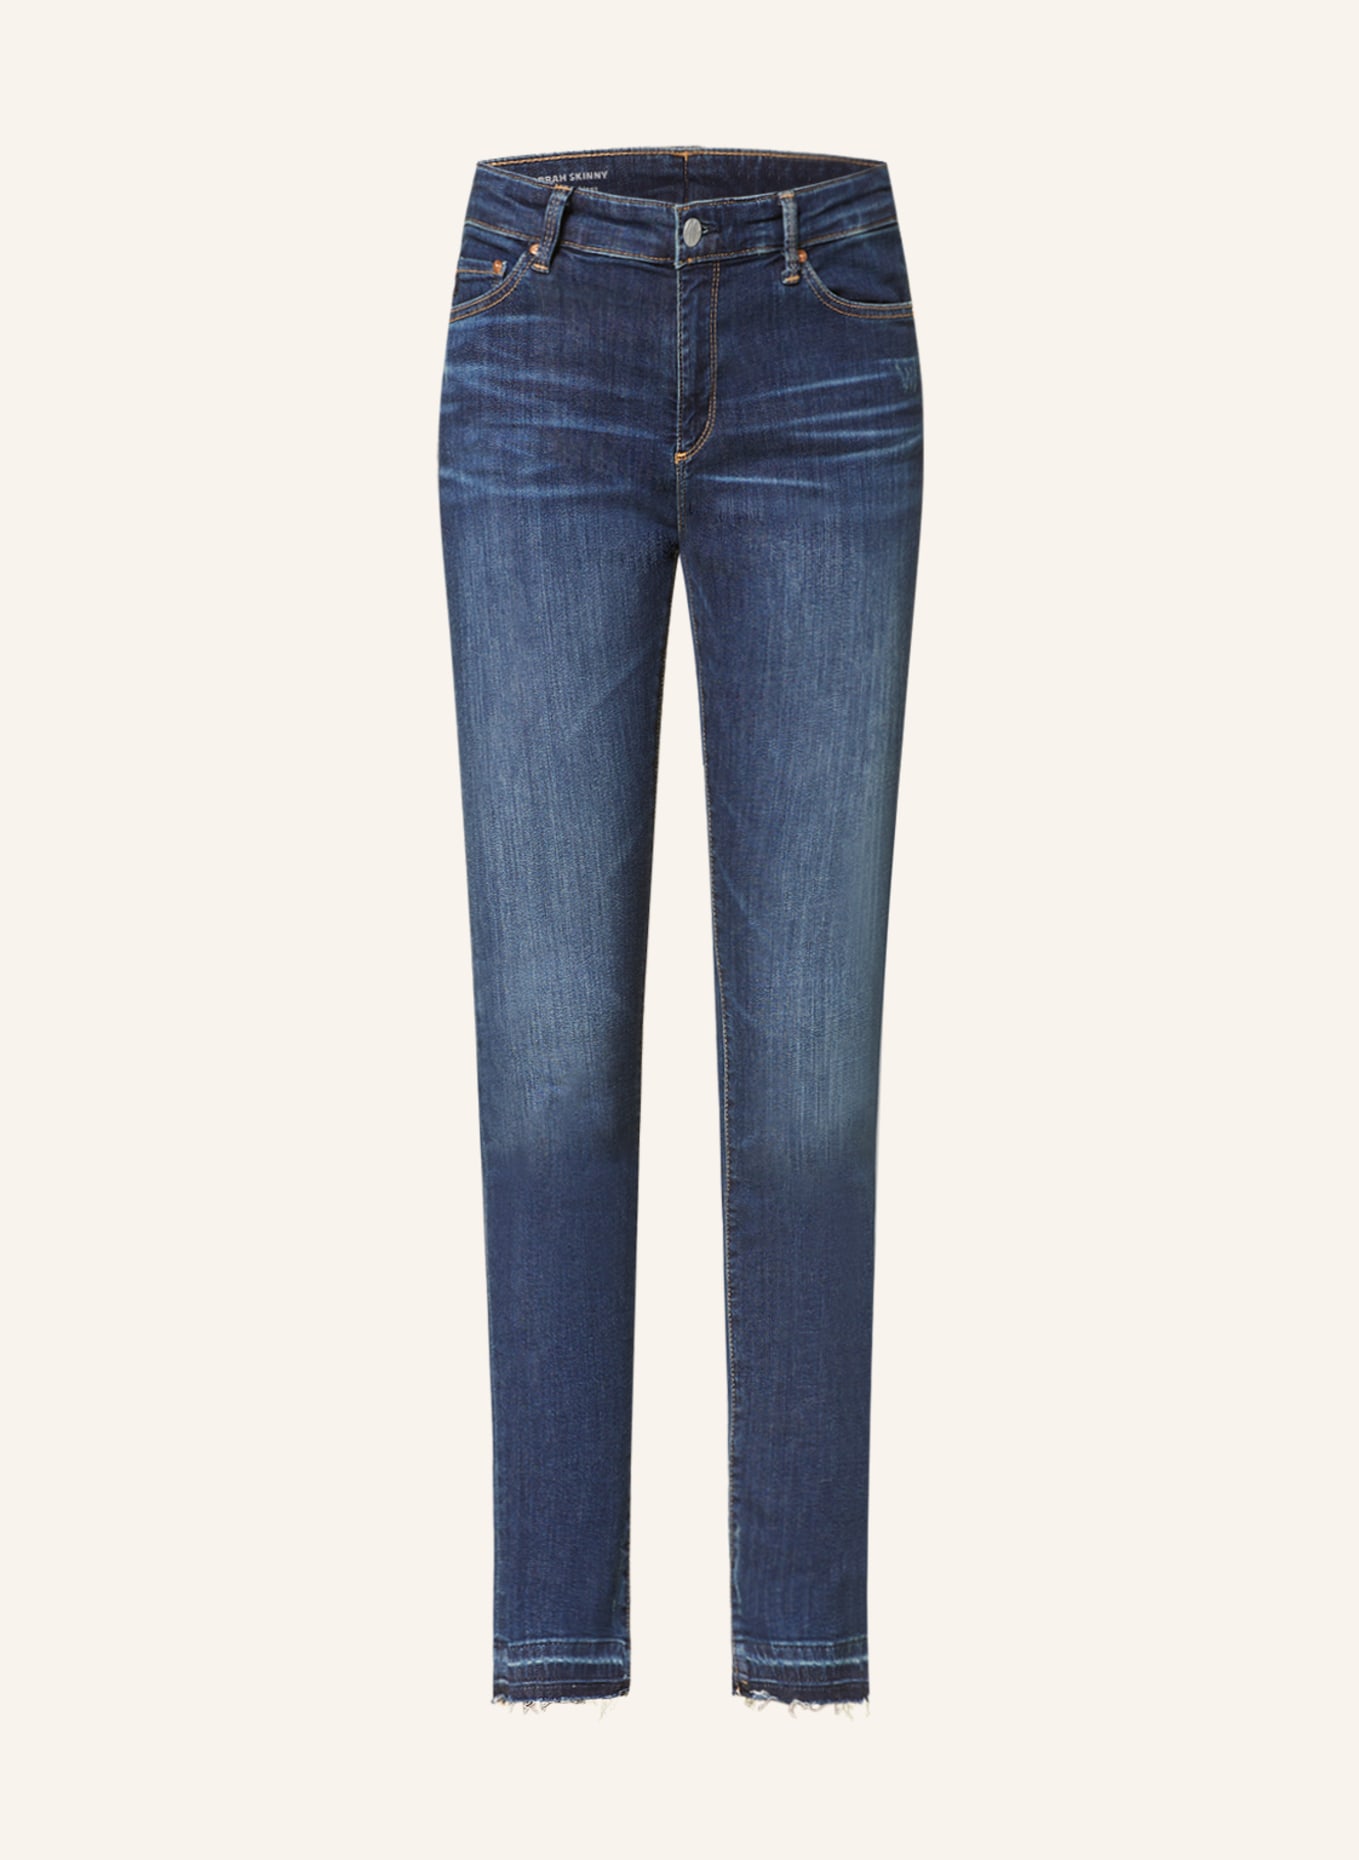 AG Jeans Skinny Jeans FARRAH, Farbe: PACLE MID BLUE (Bild 1)